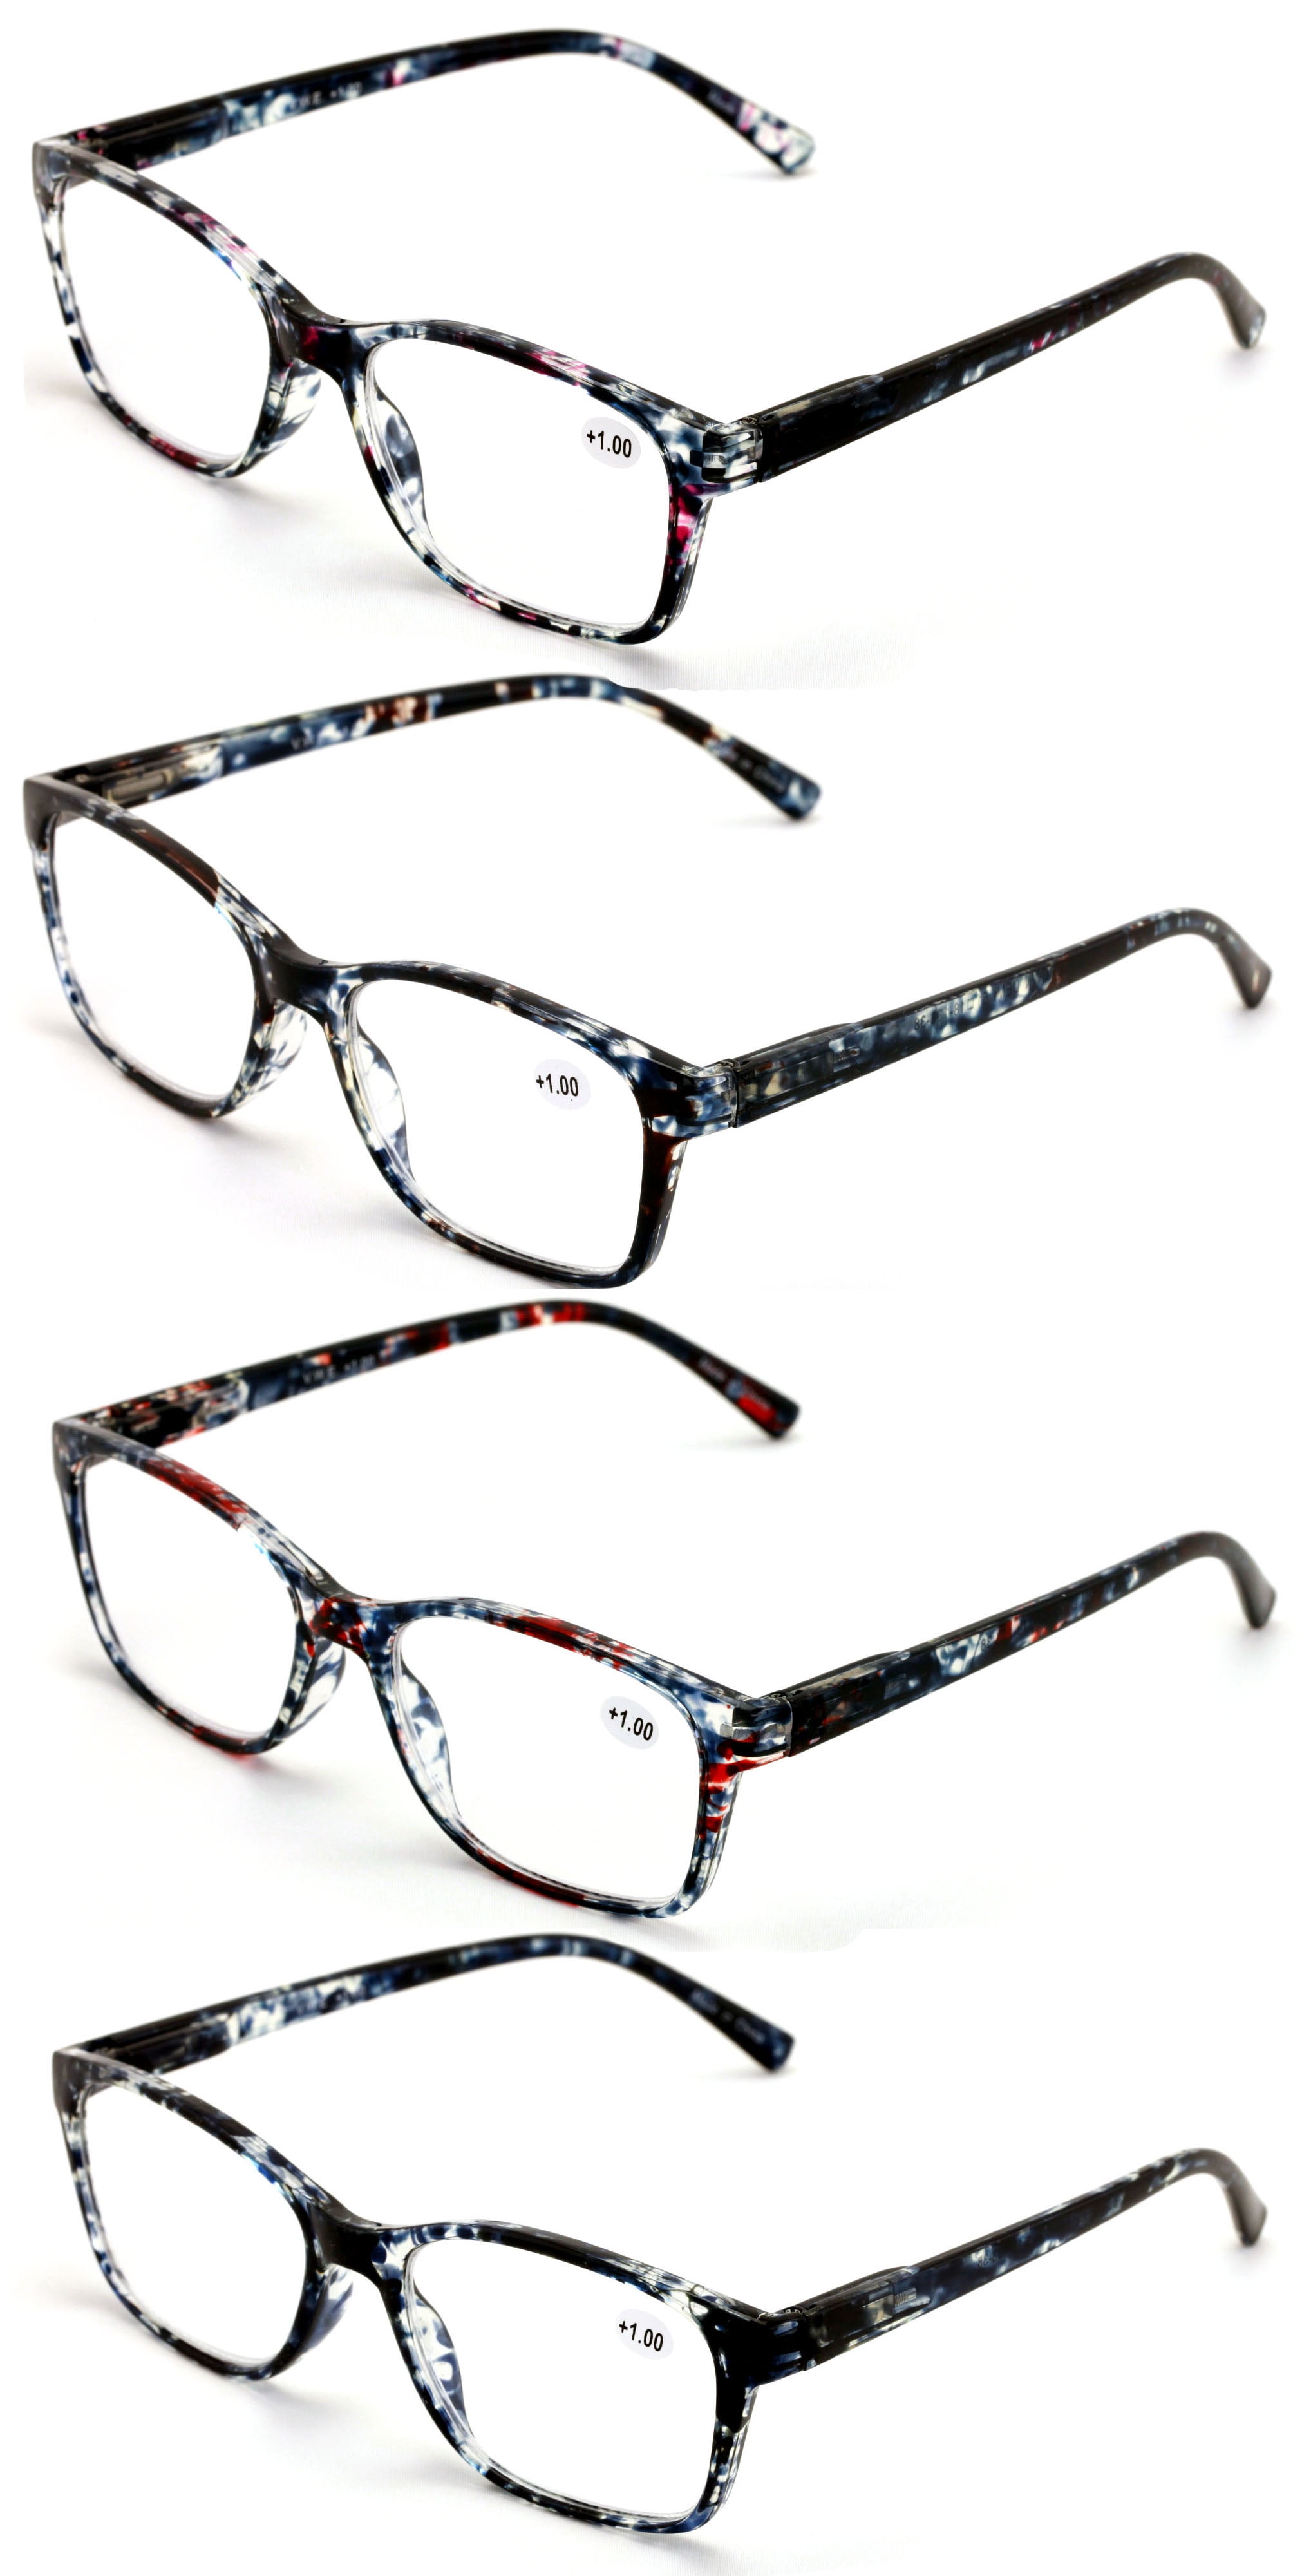 Fashionable Clear Lens Rectangular Glasses with a Spring Loaded Hinge Temples! 